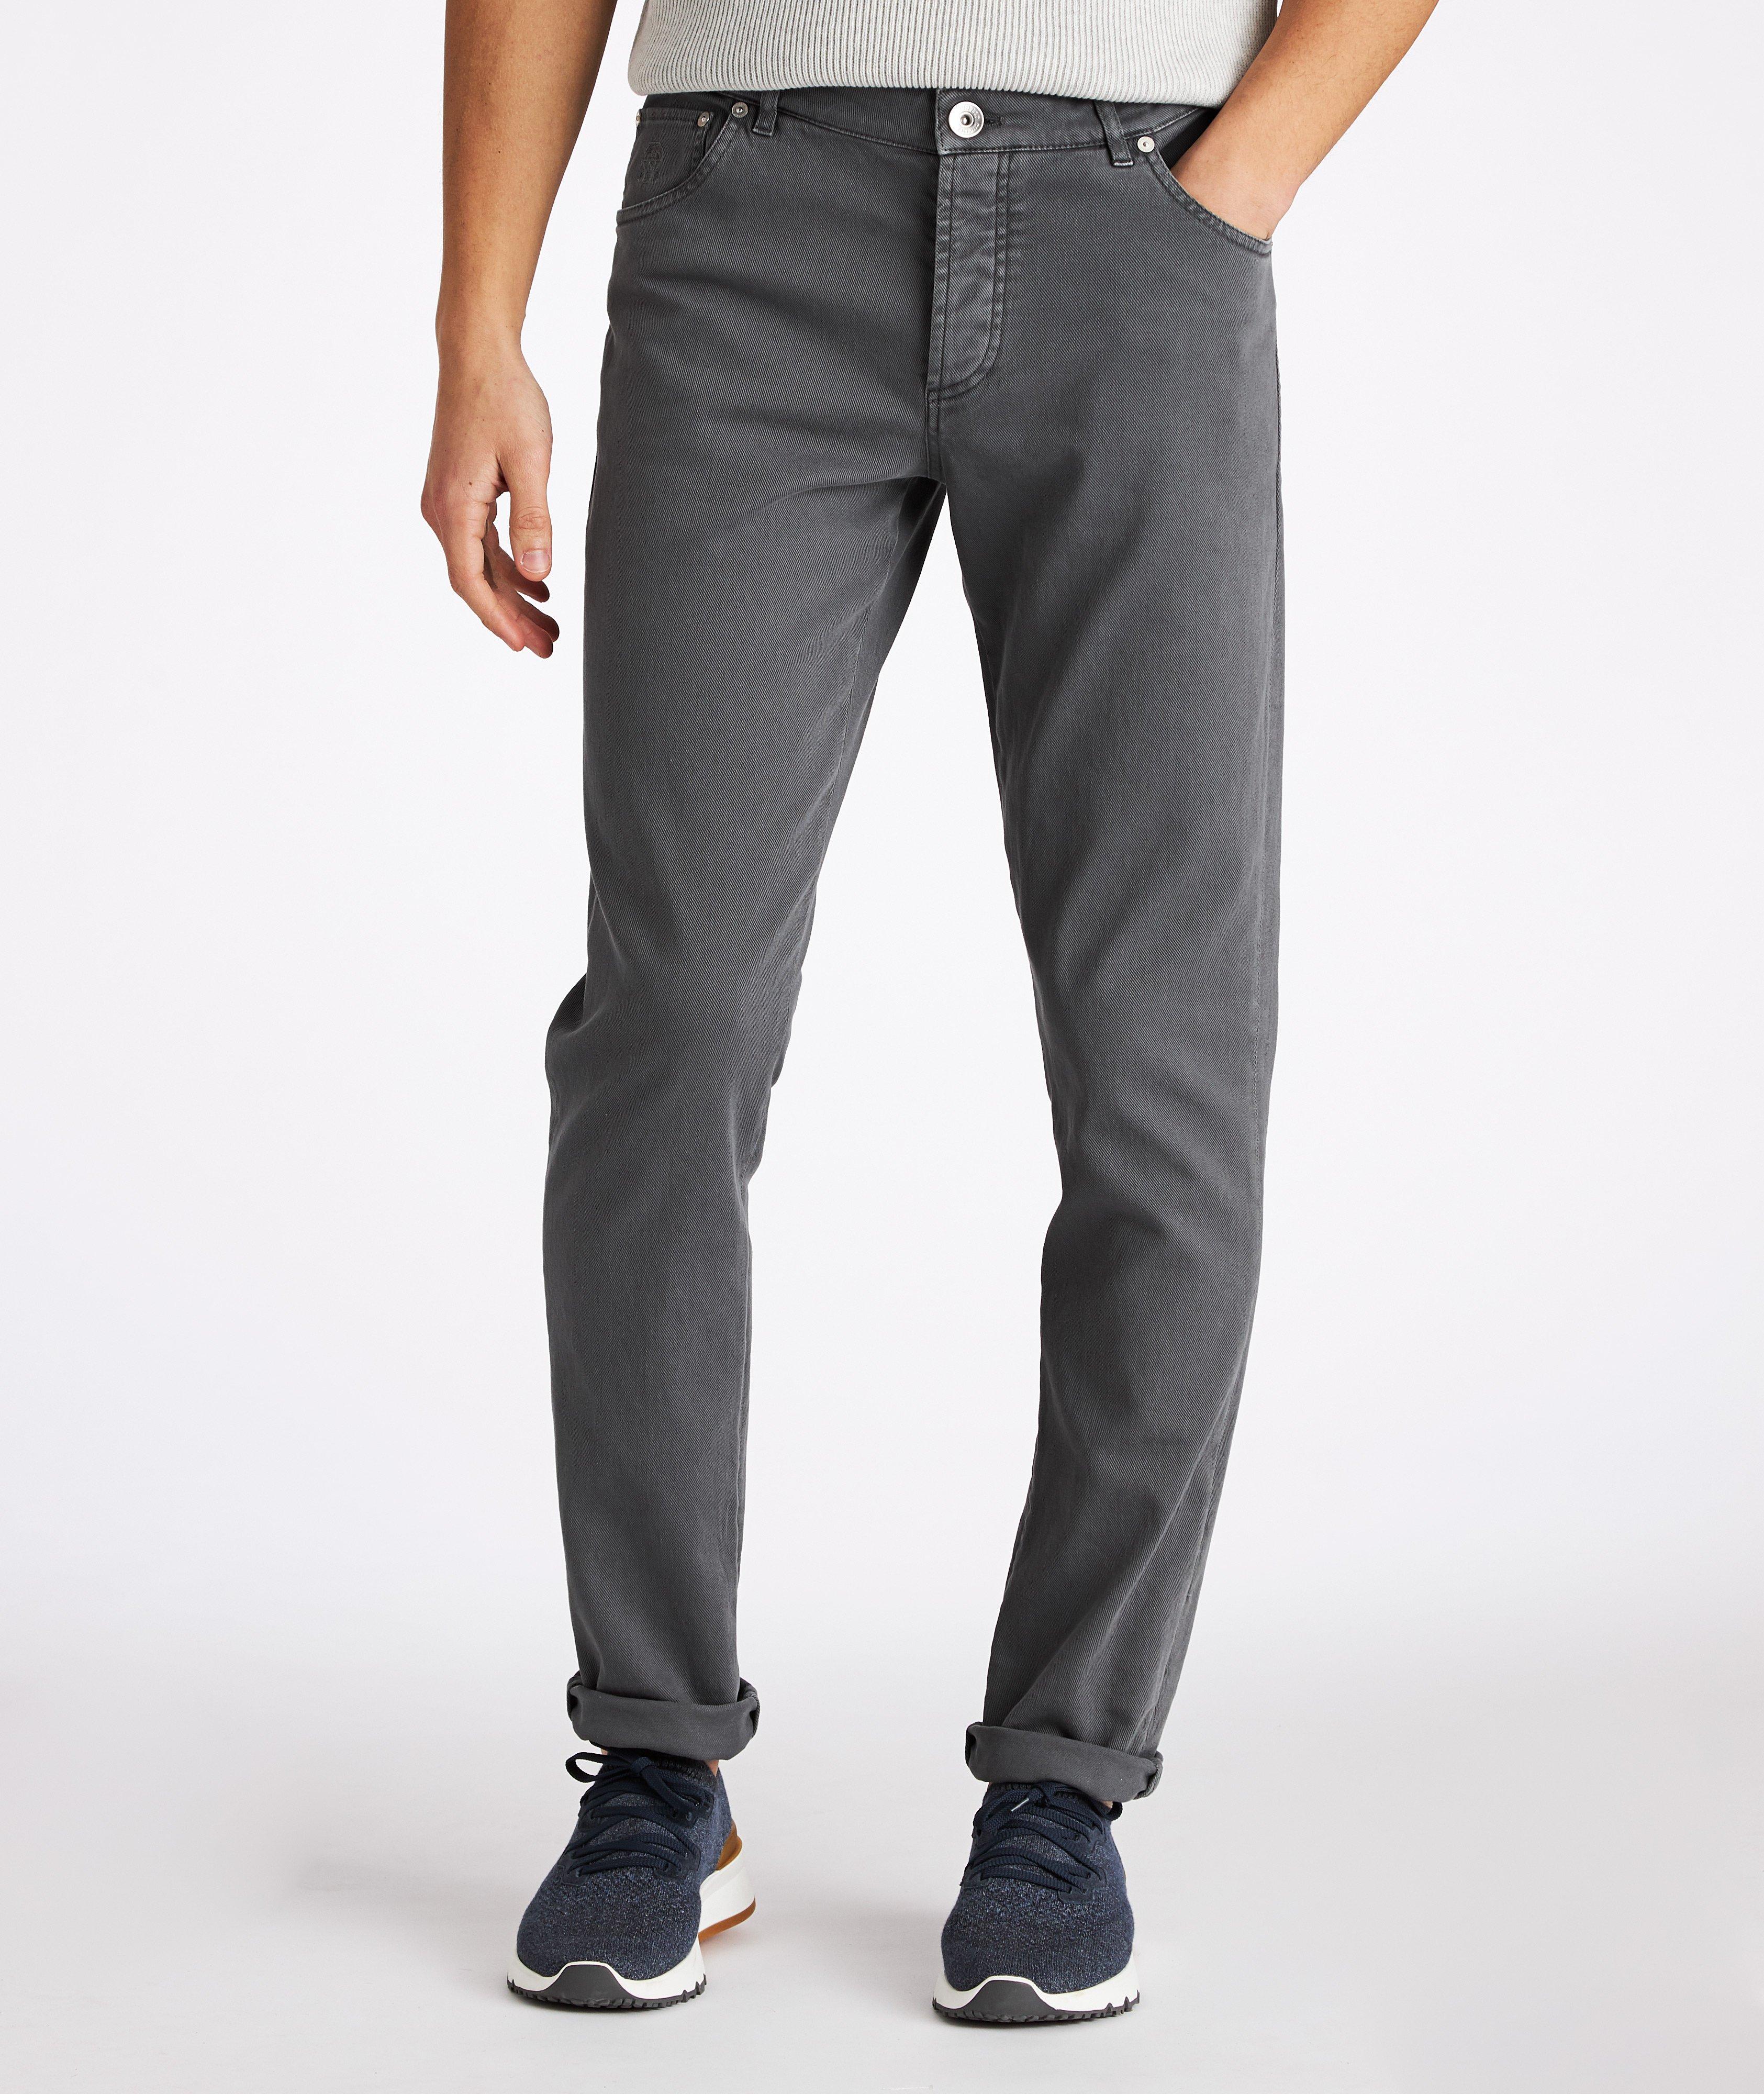 Skinny Fit Stretch-Cotton Jeans image 1